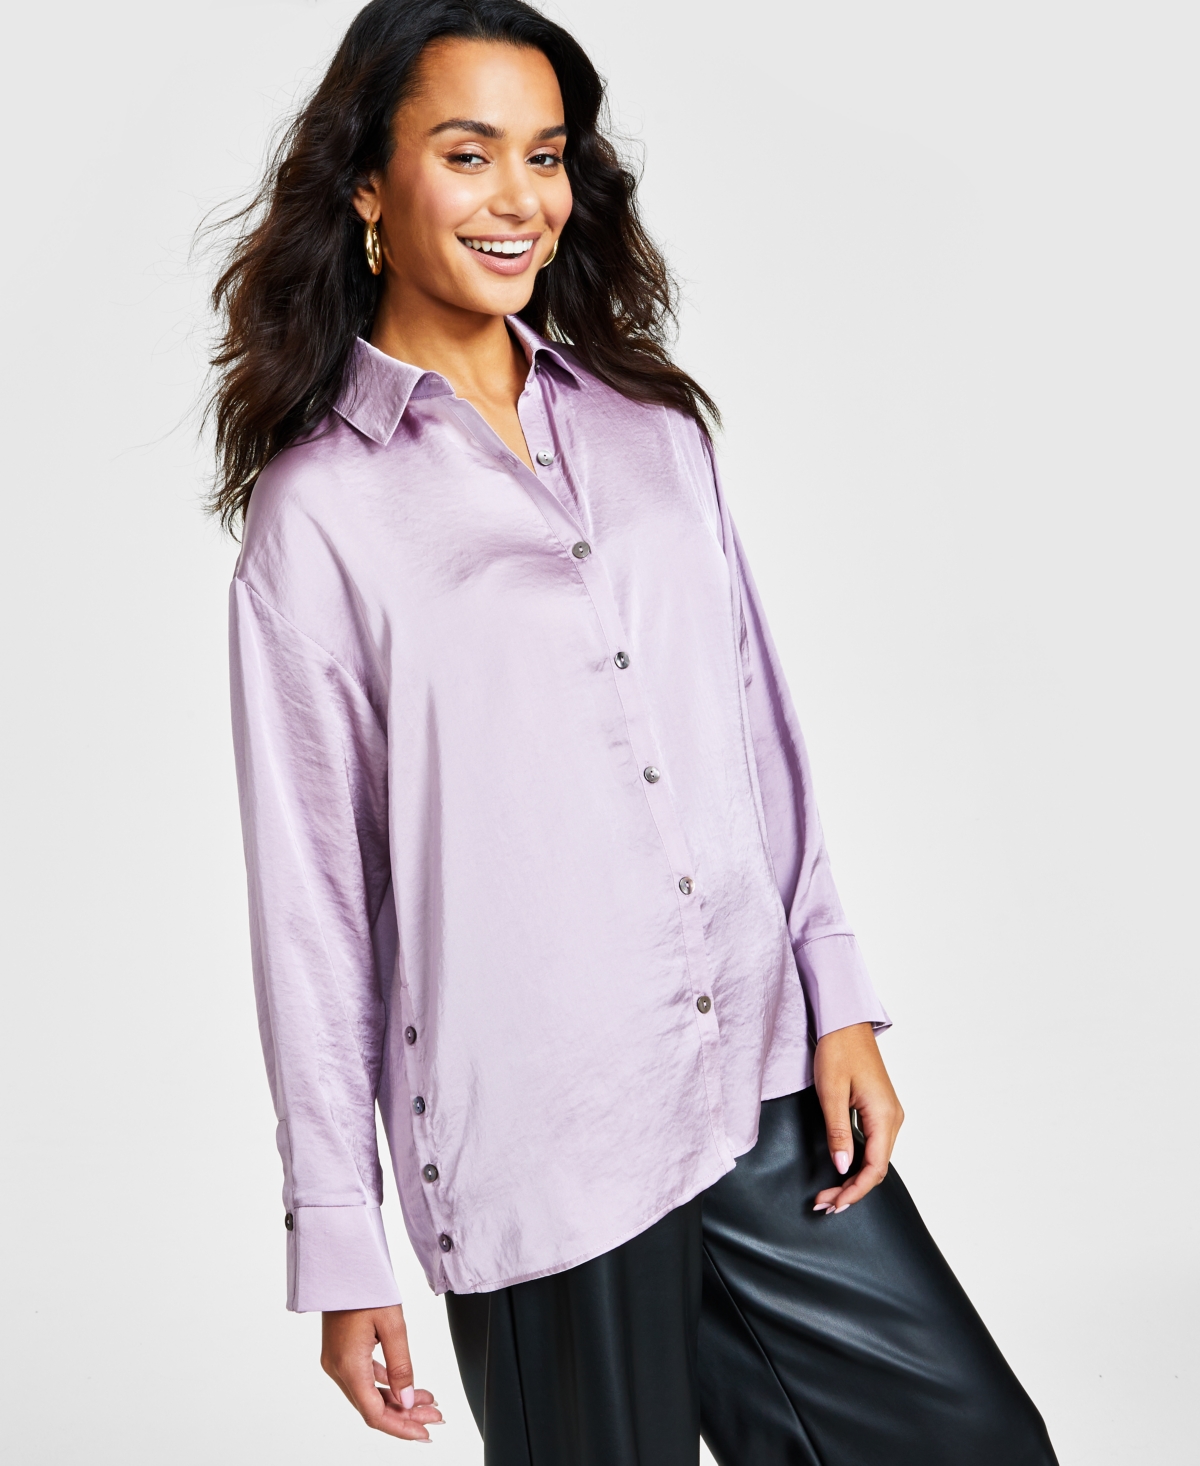 Women's Shine Button-Up Blouse, Created for Macy's - Misty Lavender